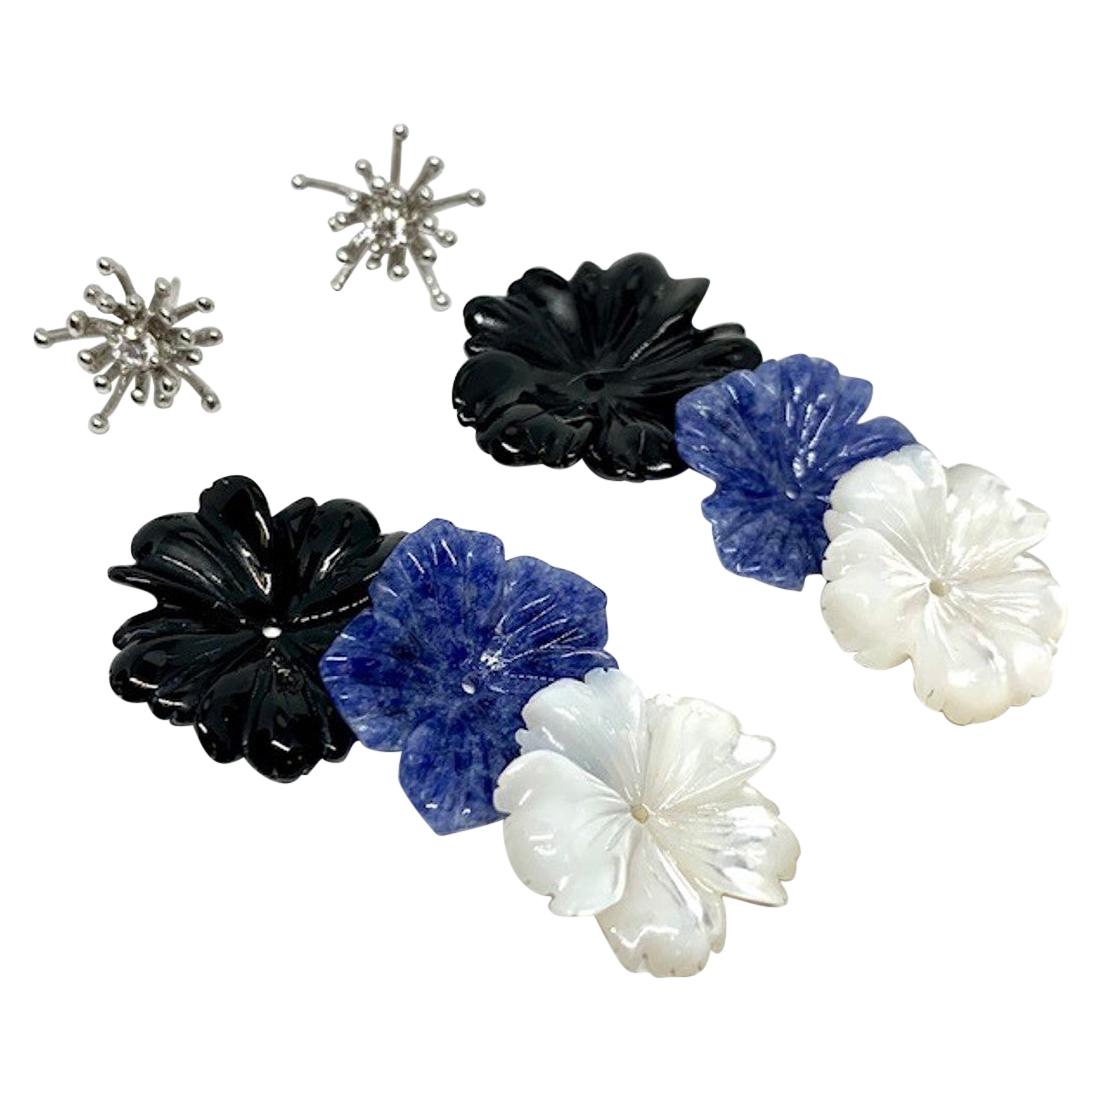  Hand Carved Gemstone Flower Earring Jacket Set with 18k White Gold and Diamonds